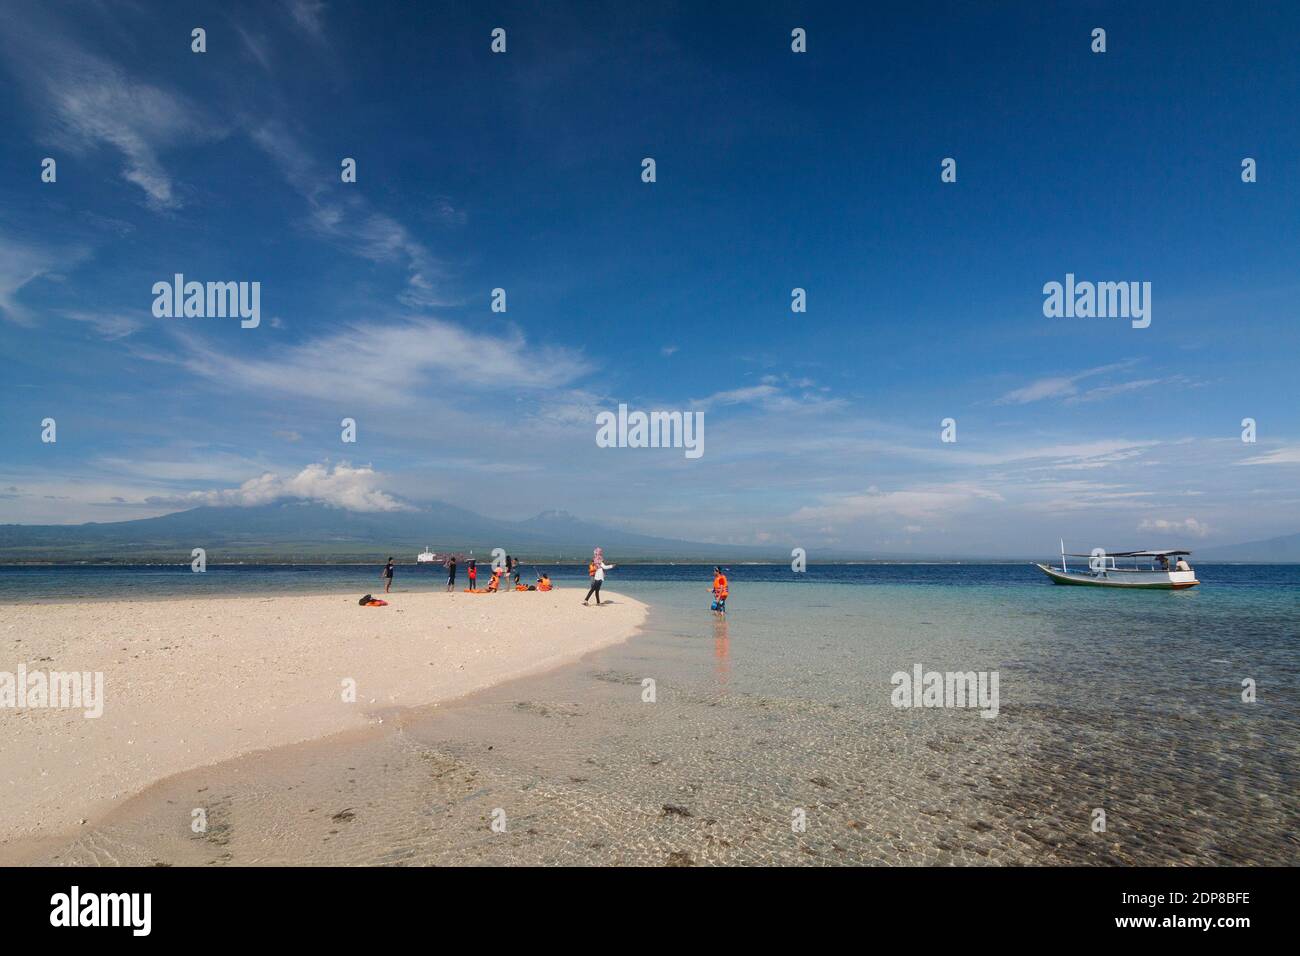 The tourists arrive at Tabuhan Island, one of the marine tourism destinations in Banyuwangi district. Stock Photo